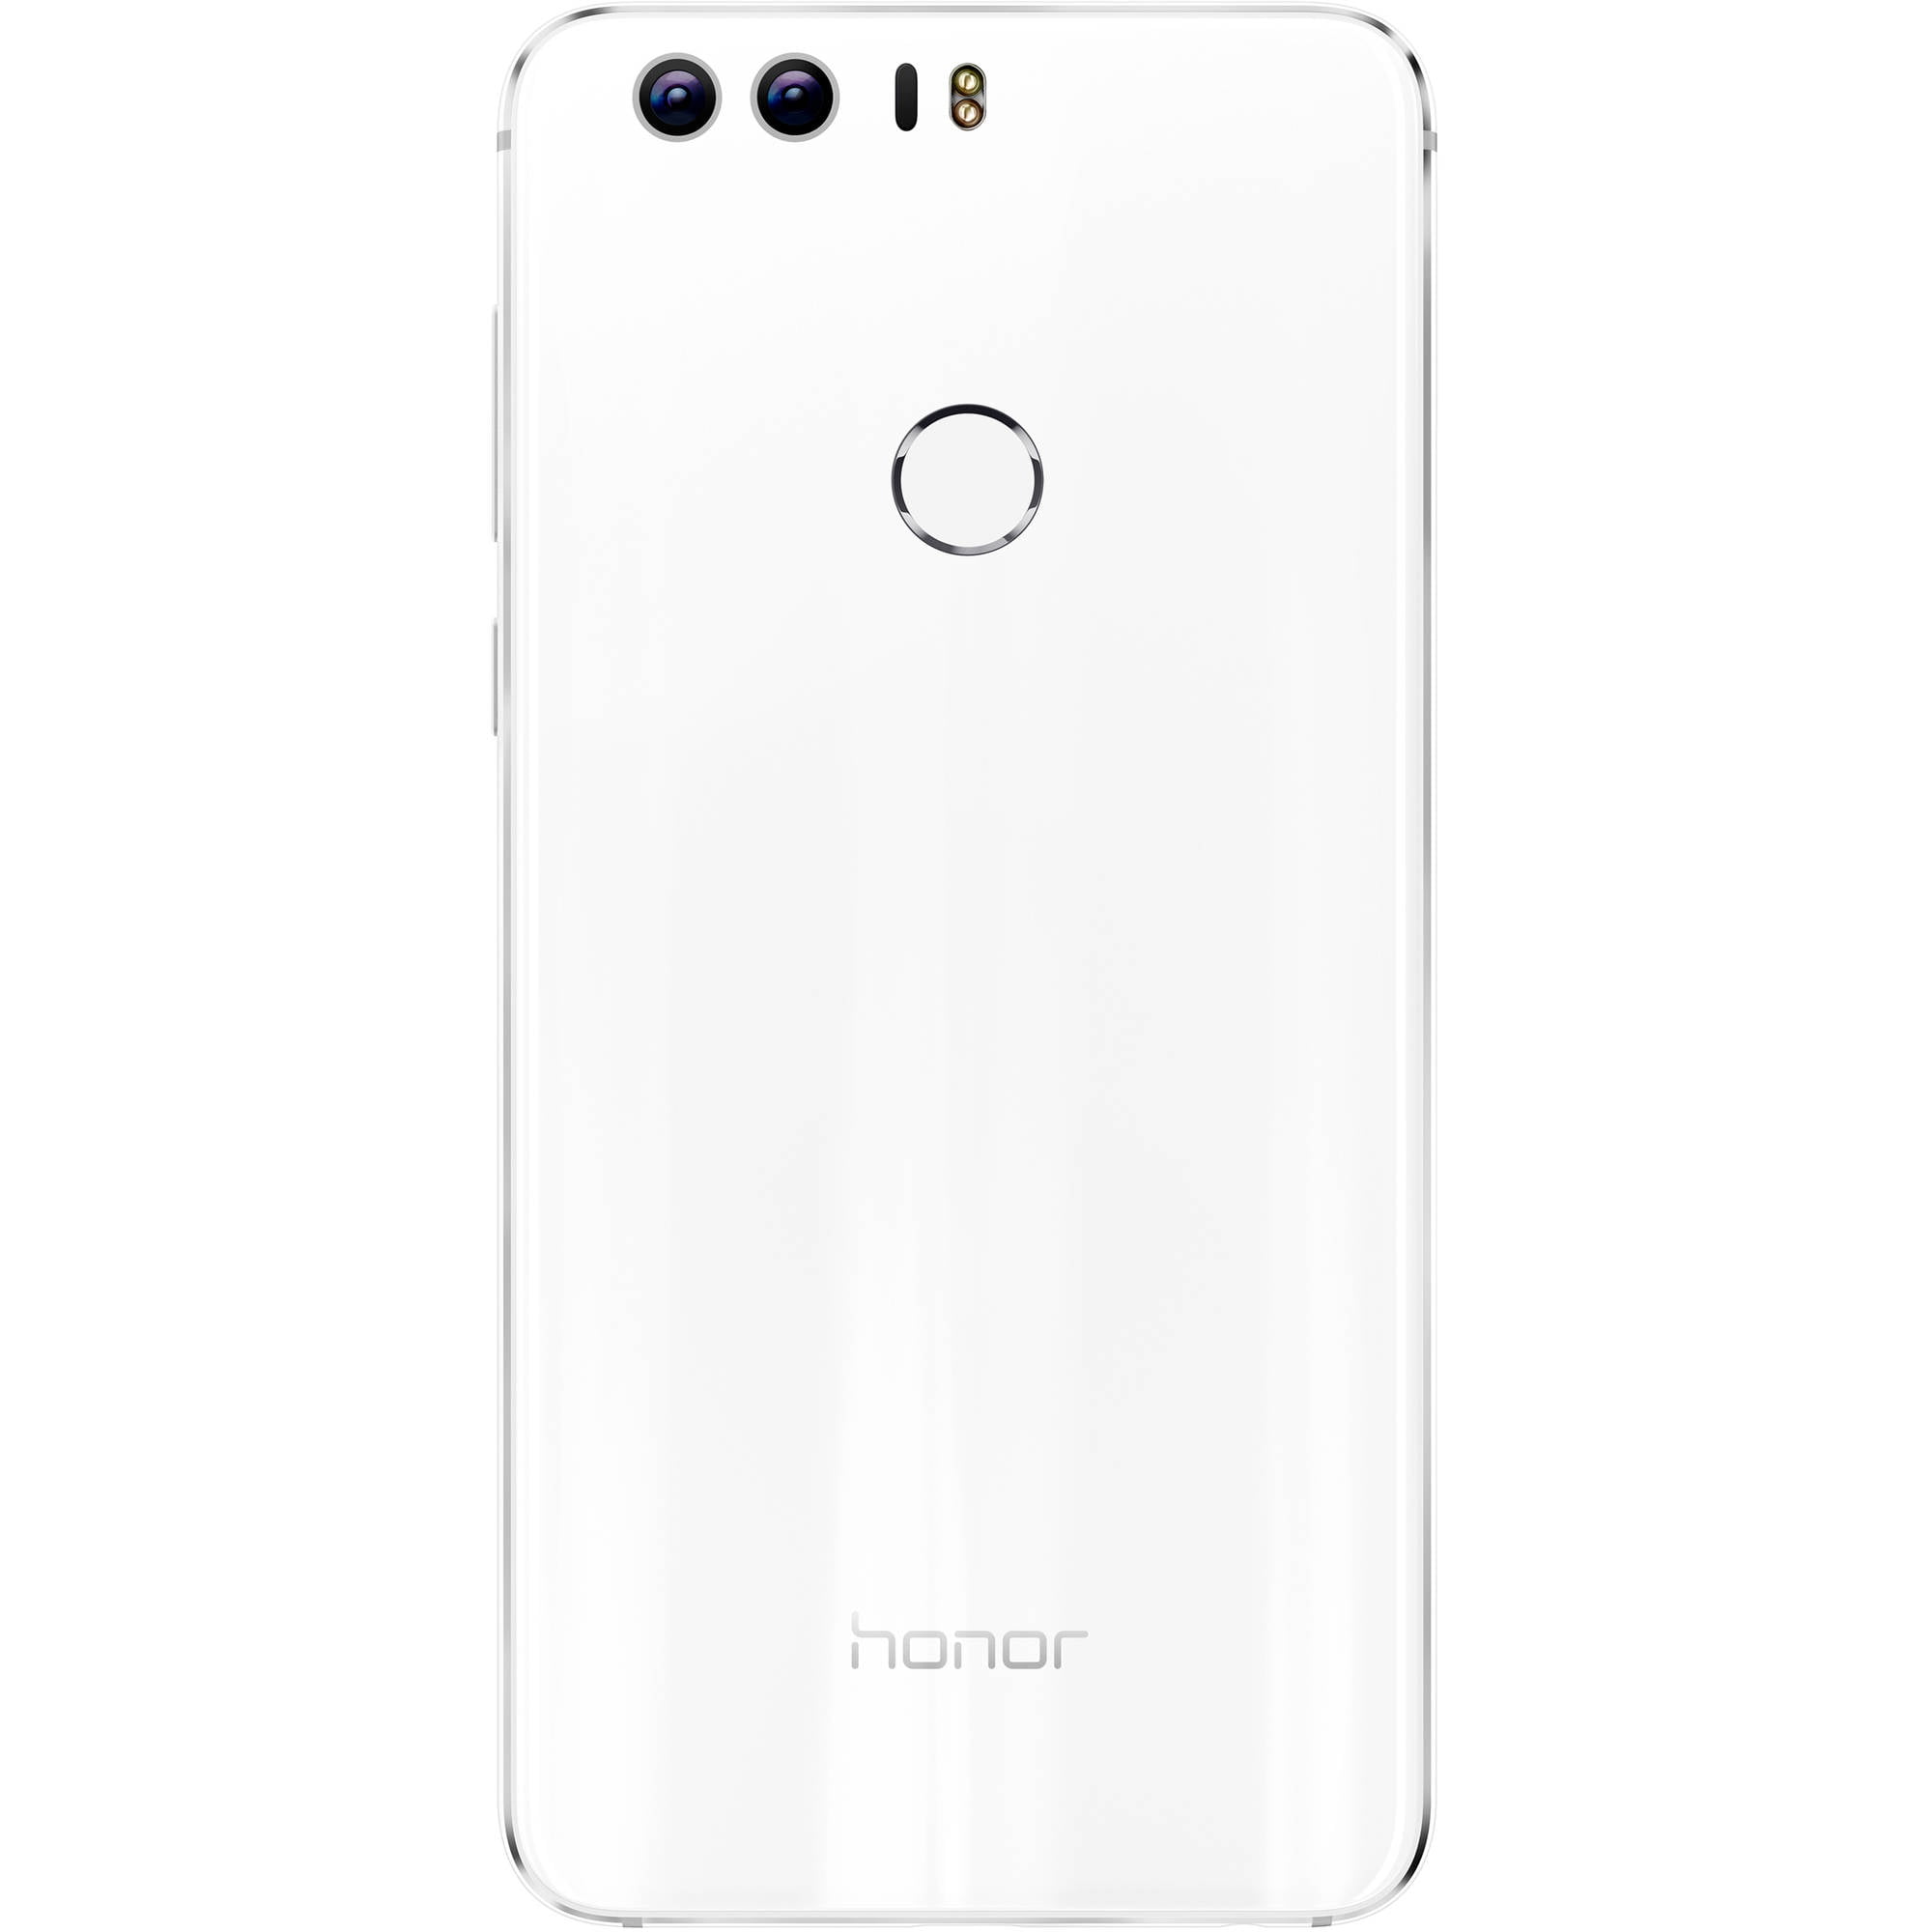 HUAWEI Honor 8 GSM 4G LTE Android Smartphone with Honor 8 Gift Box (Unlocked) -